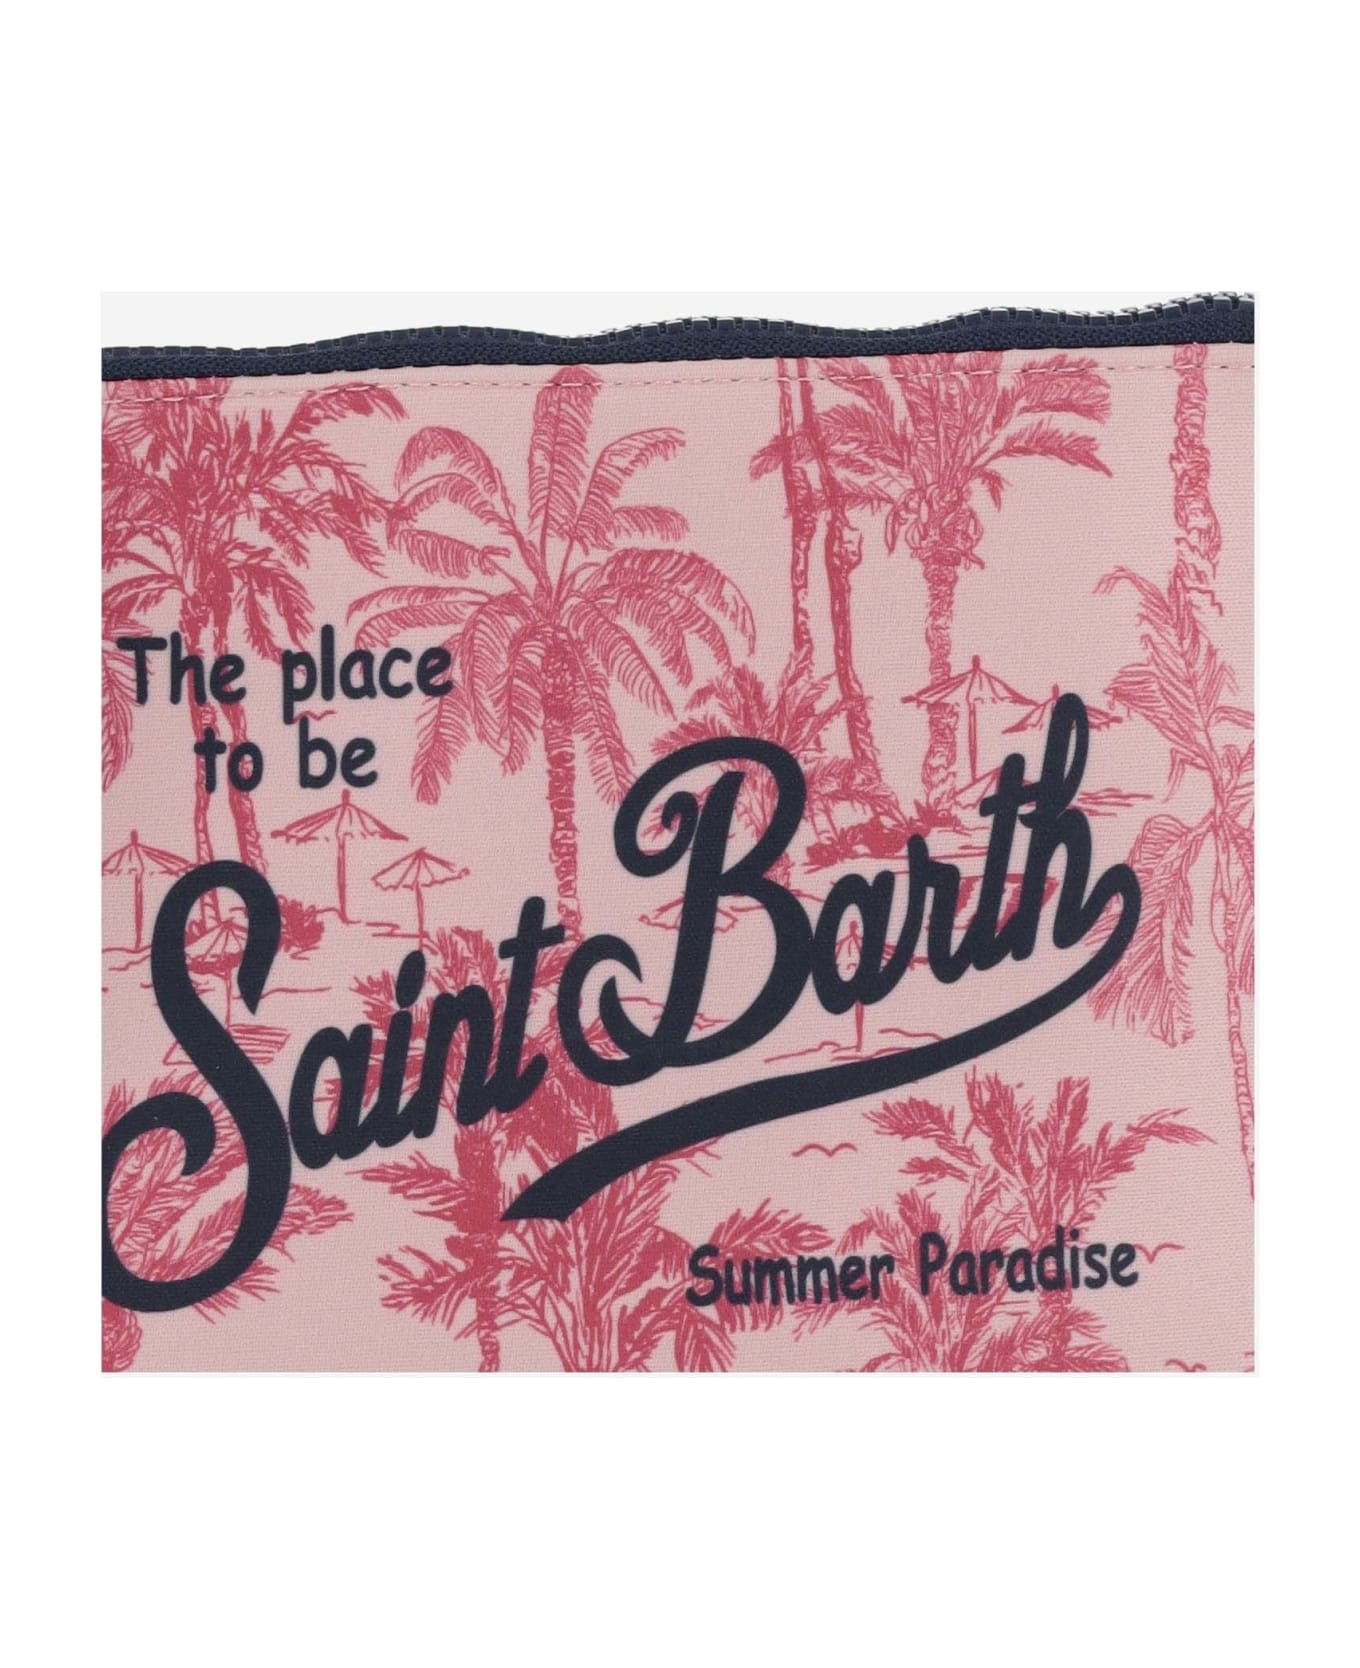 MC2 Saint Barth Scuba Clutch Bag With Graphic Print - Pink クラッチバッグ